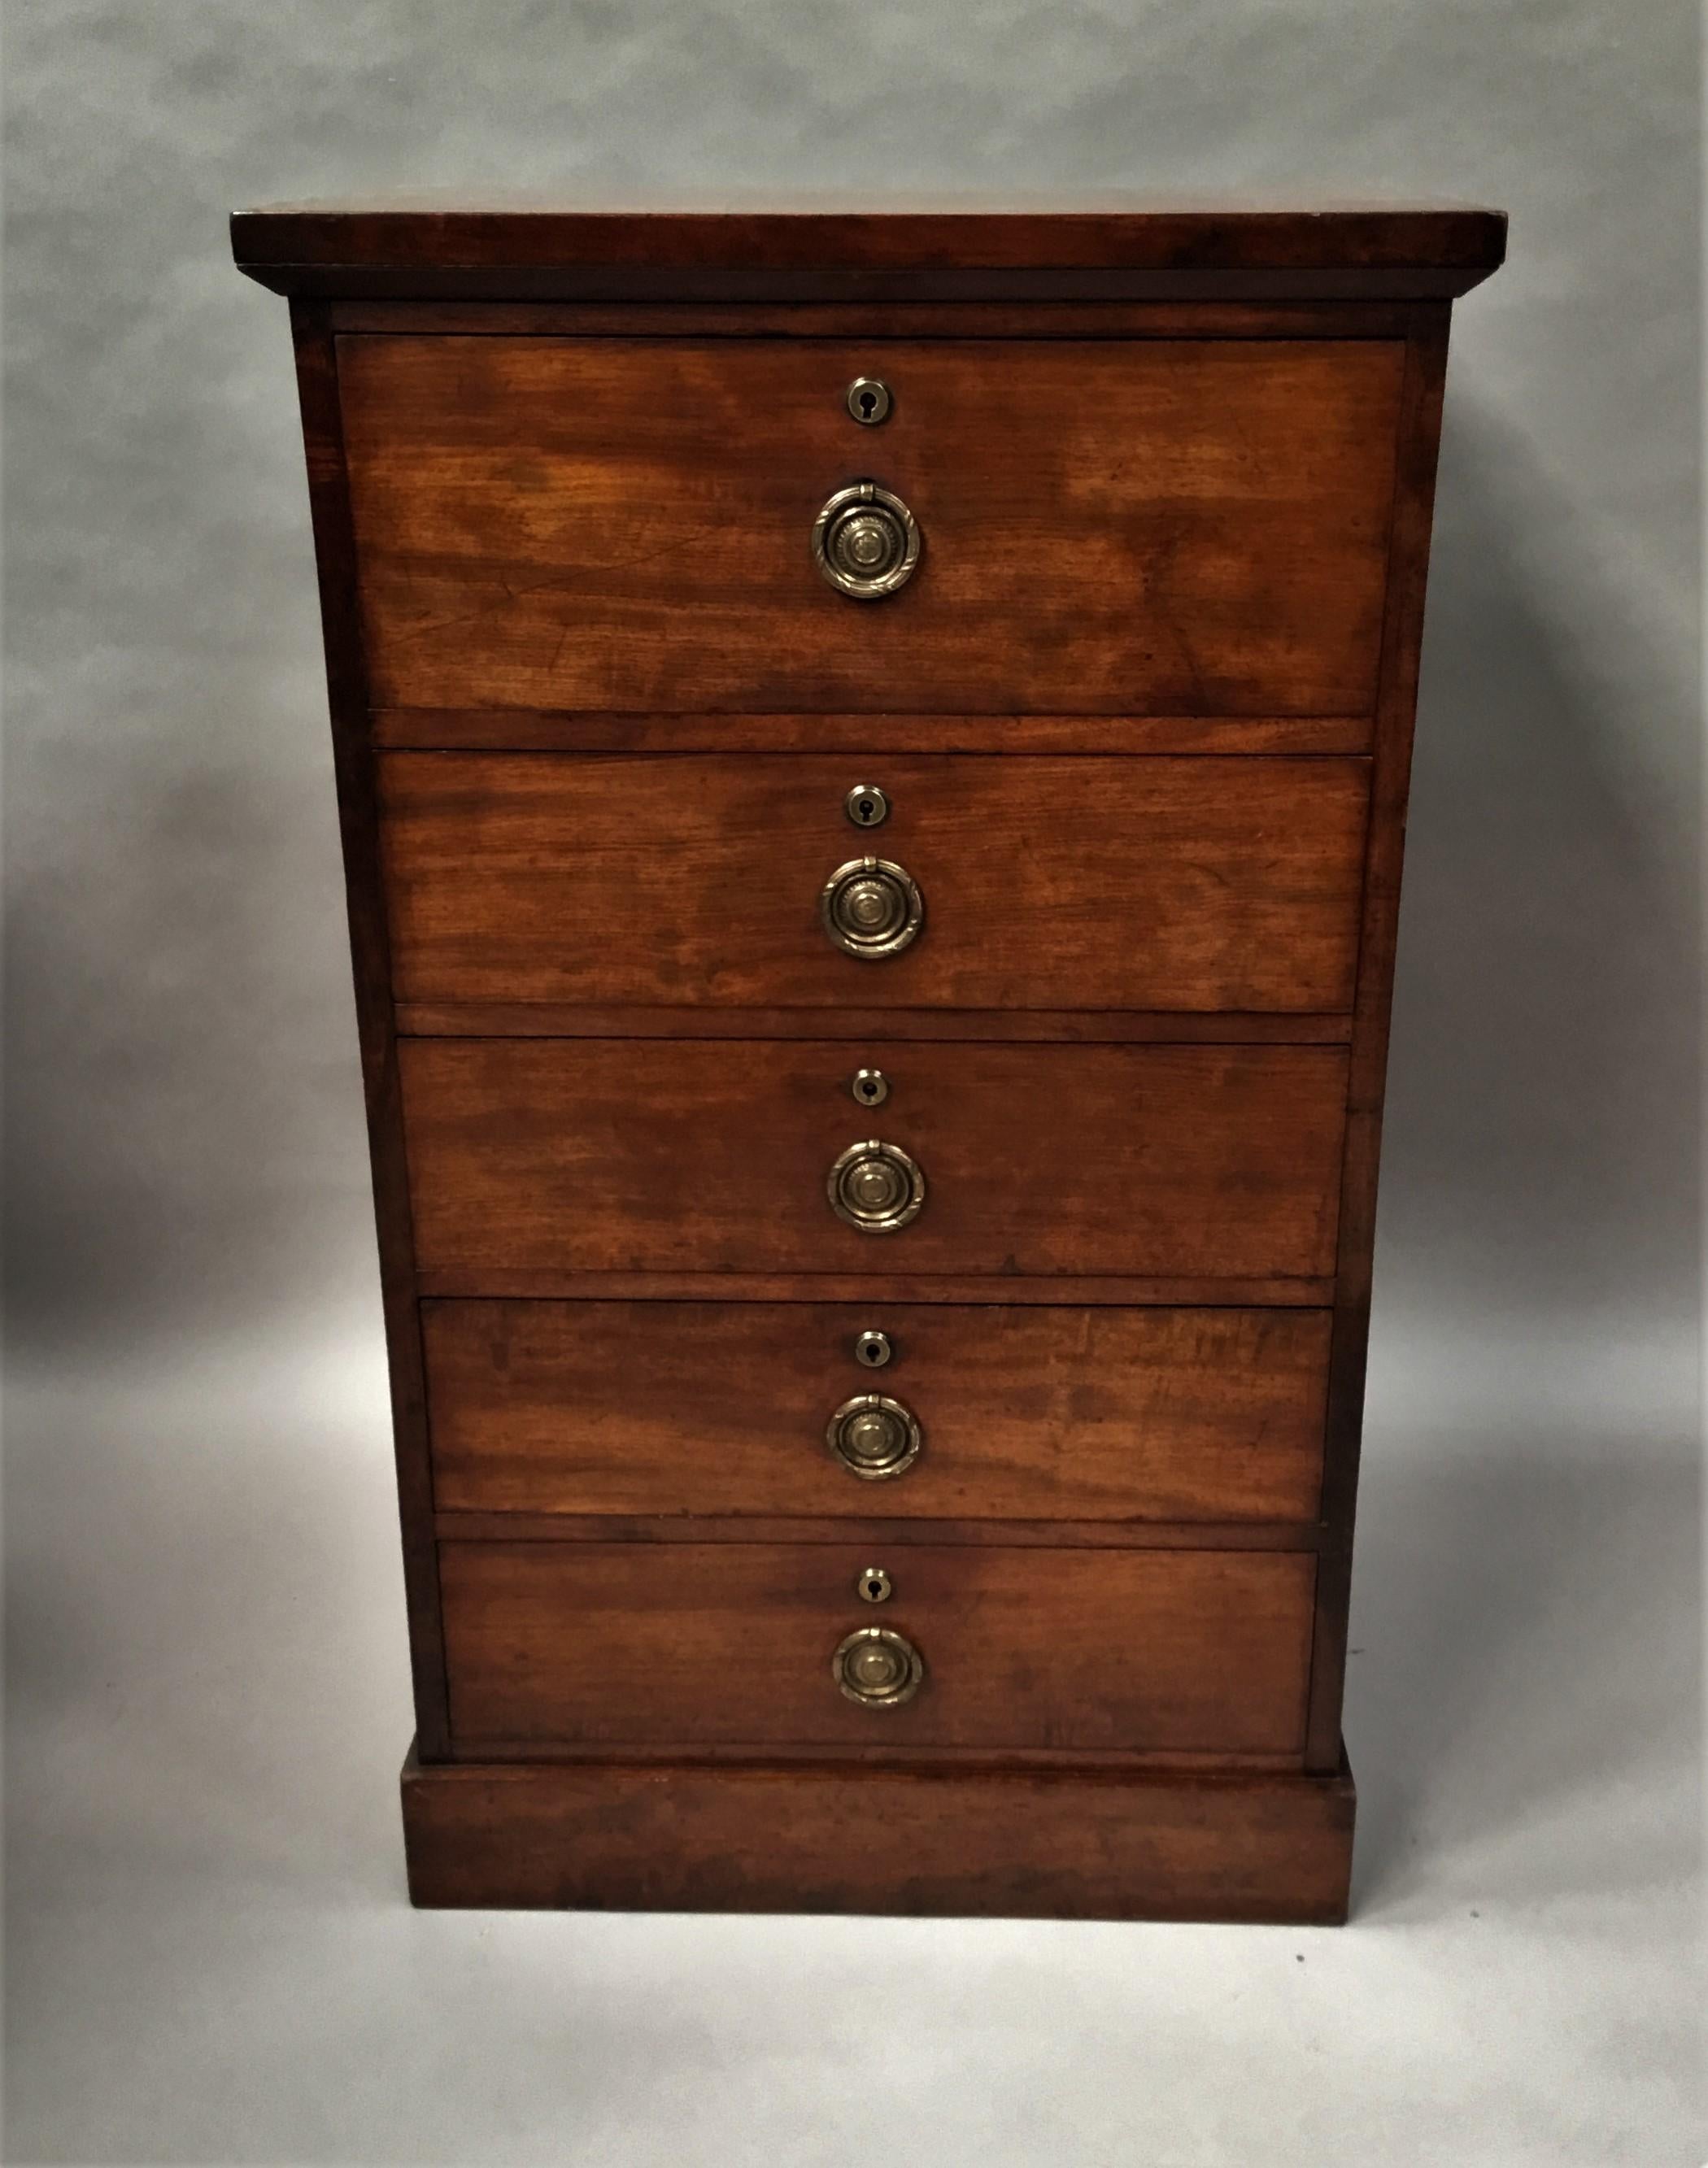 A good late Regency mahogany secretaire chest of drawers/pedestal cabinet of unusual narrow proportions; the well figured rectangular top above the secretaire writing drawer with typical hinged front and brass release catches revealing the fitted